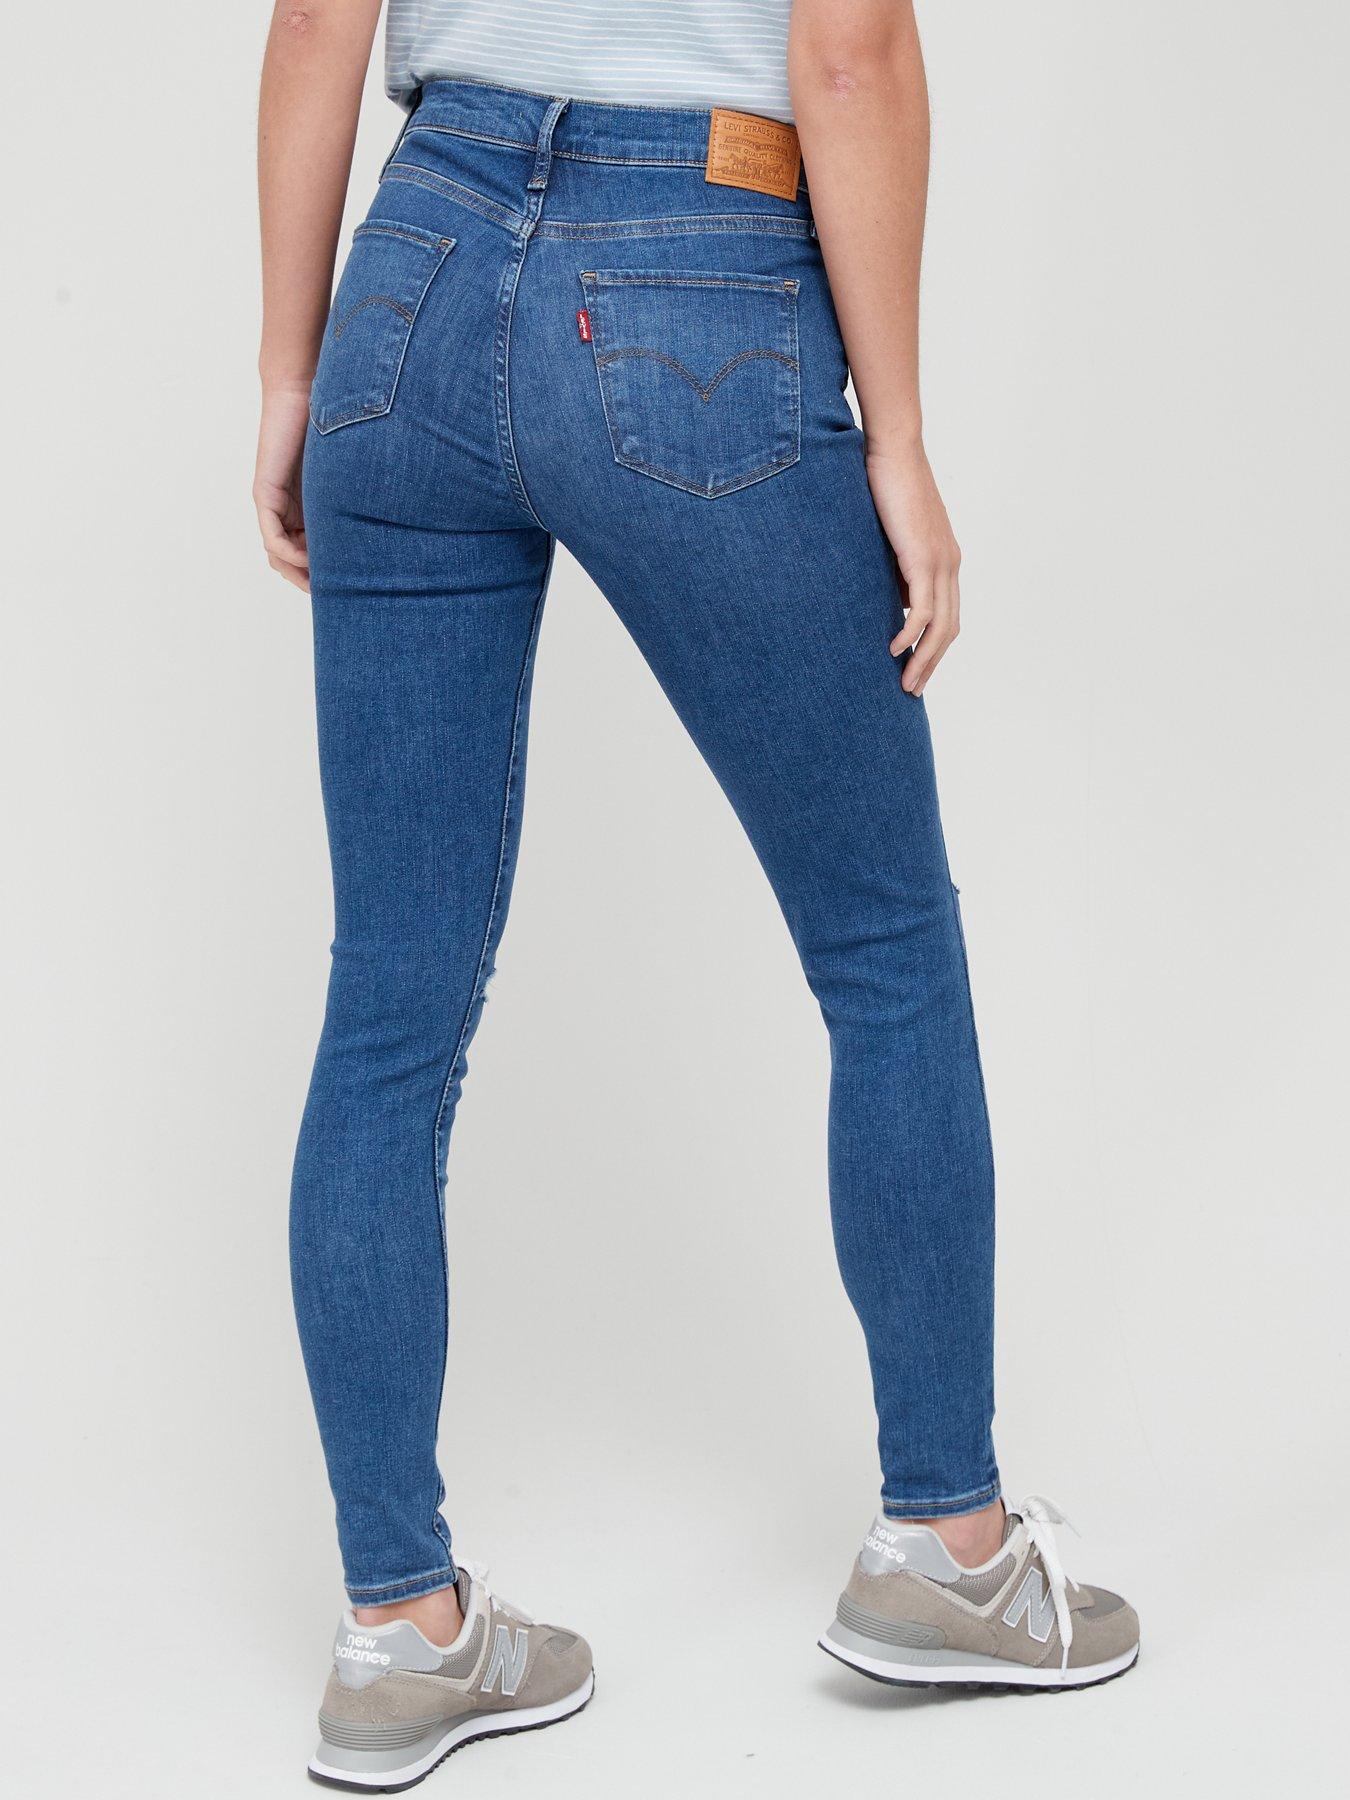 Levi's Women's High Waisted Jeans